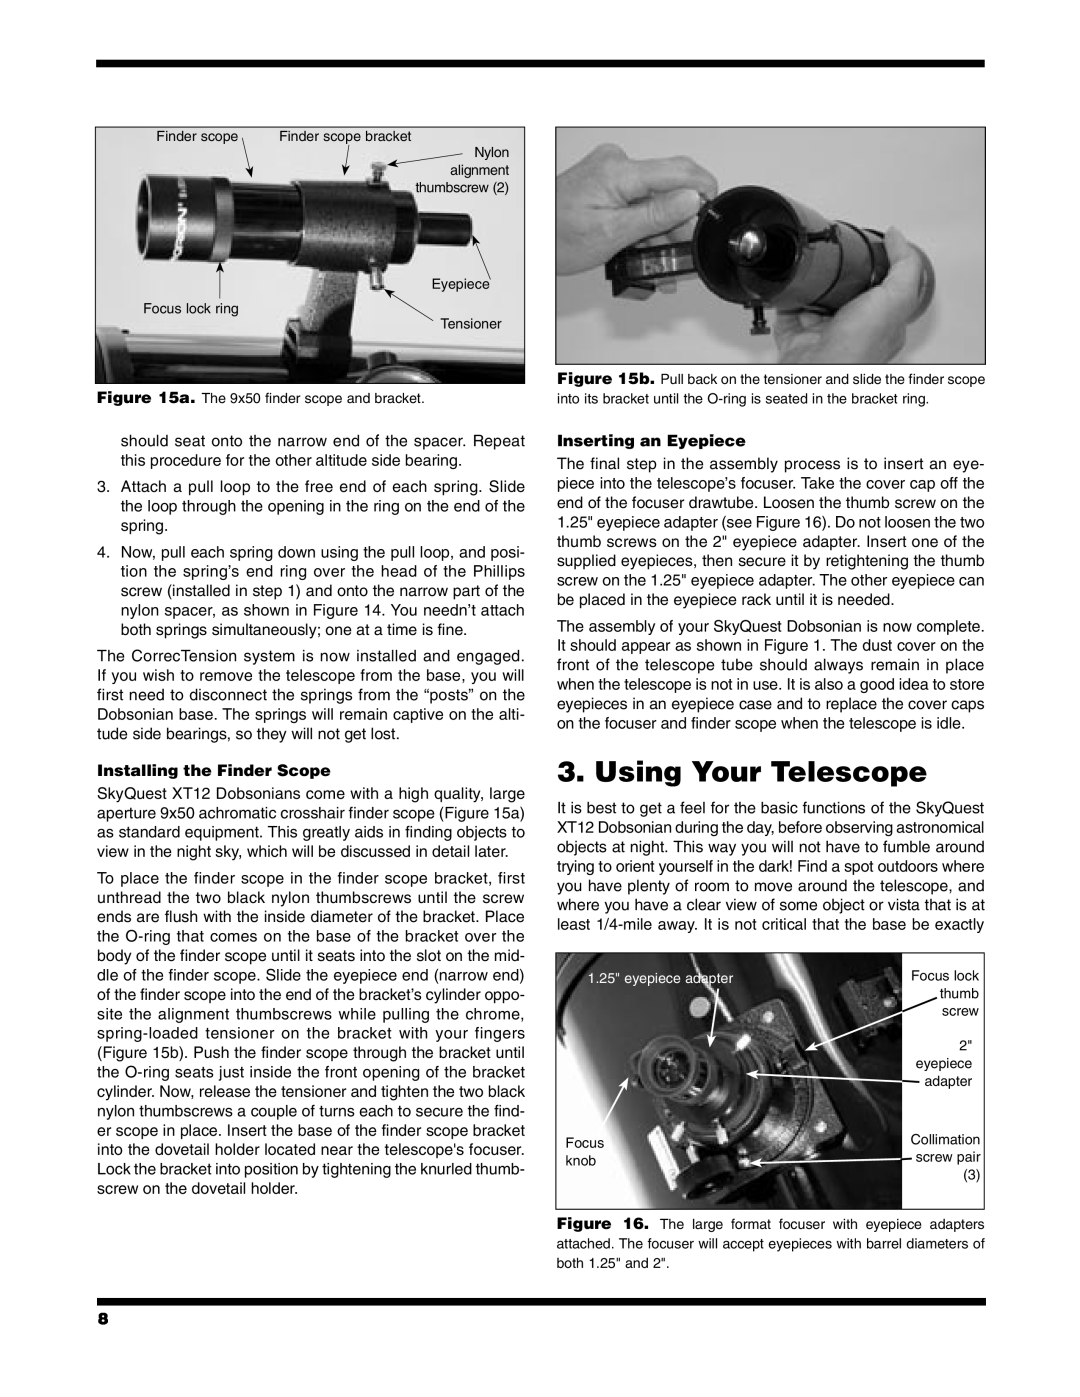 Orion 9966 instruction manual Using Your Telescope, Installing the Finder Scope, Inserting an Eyepiece 